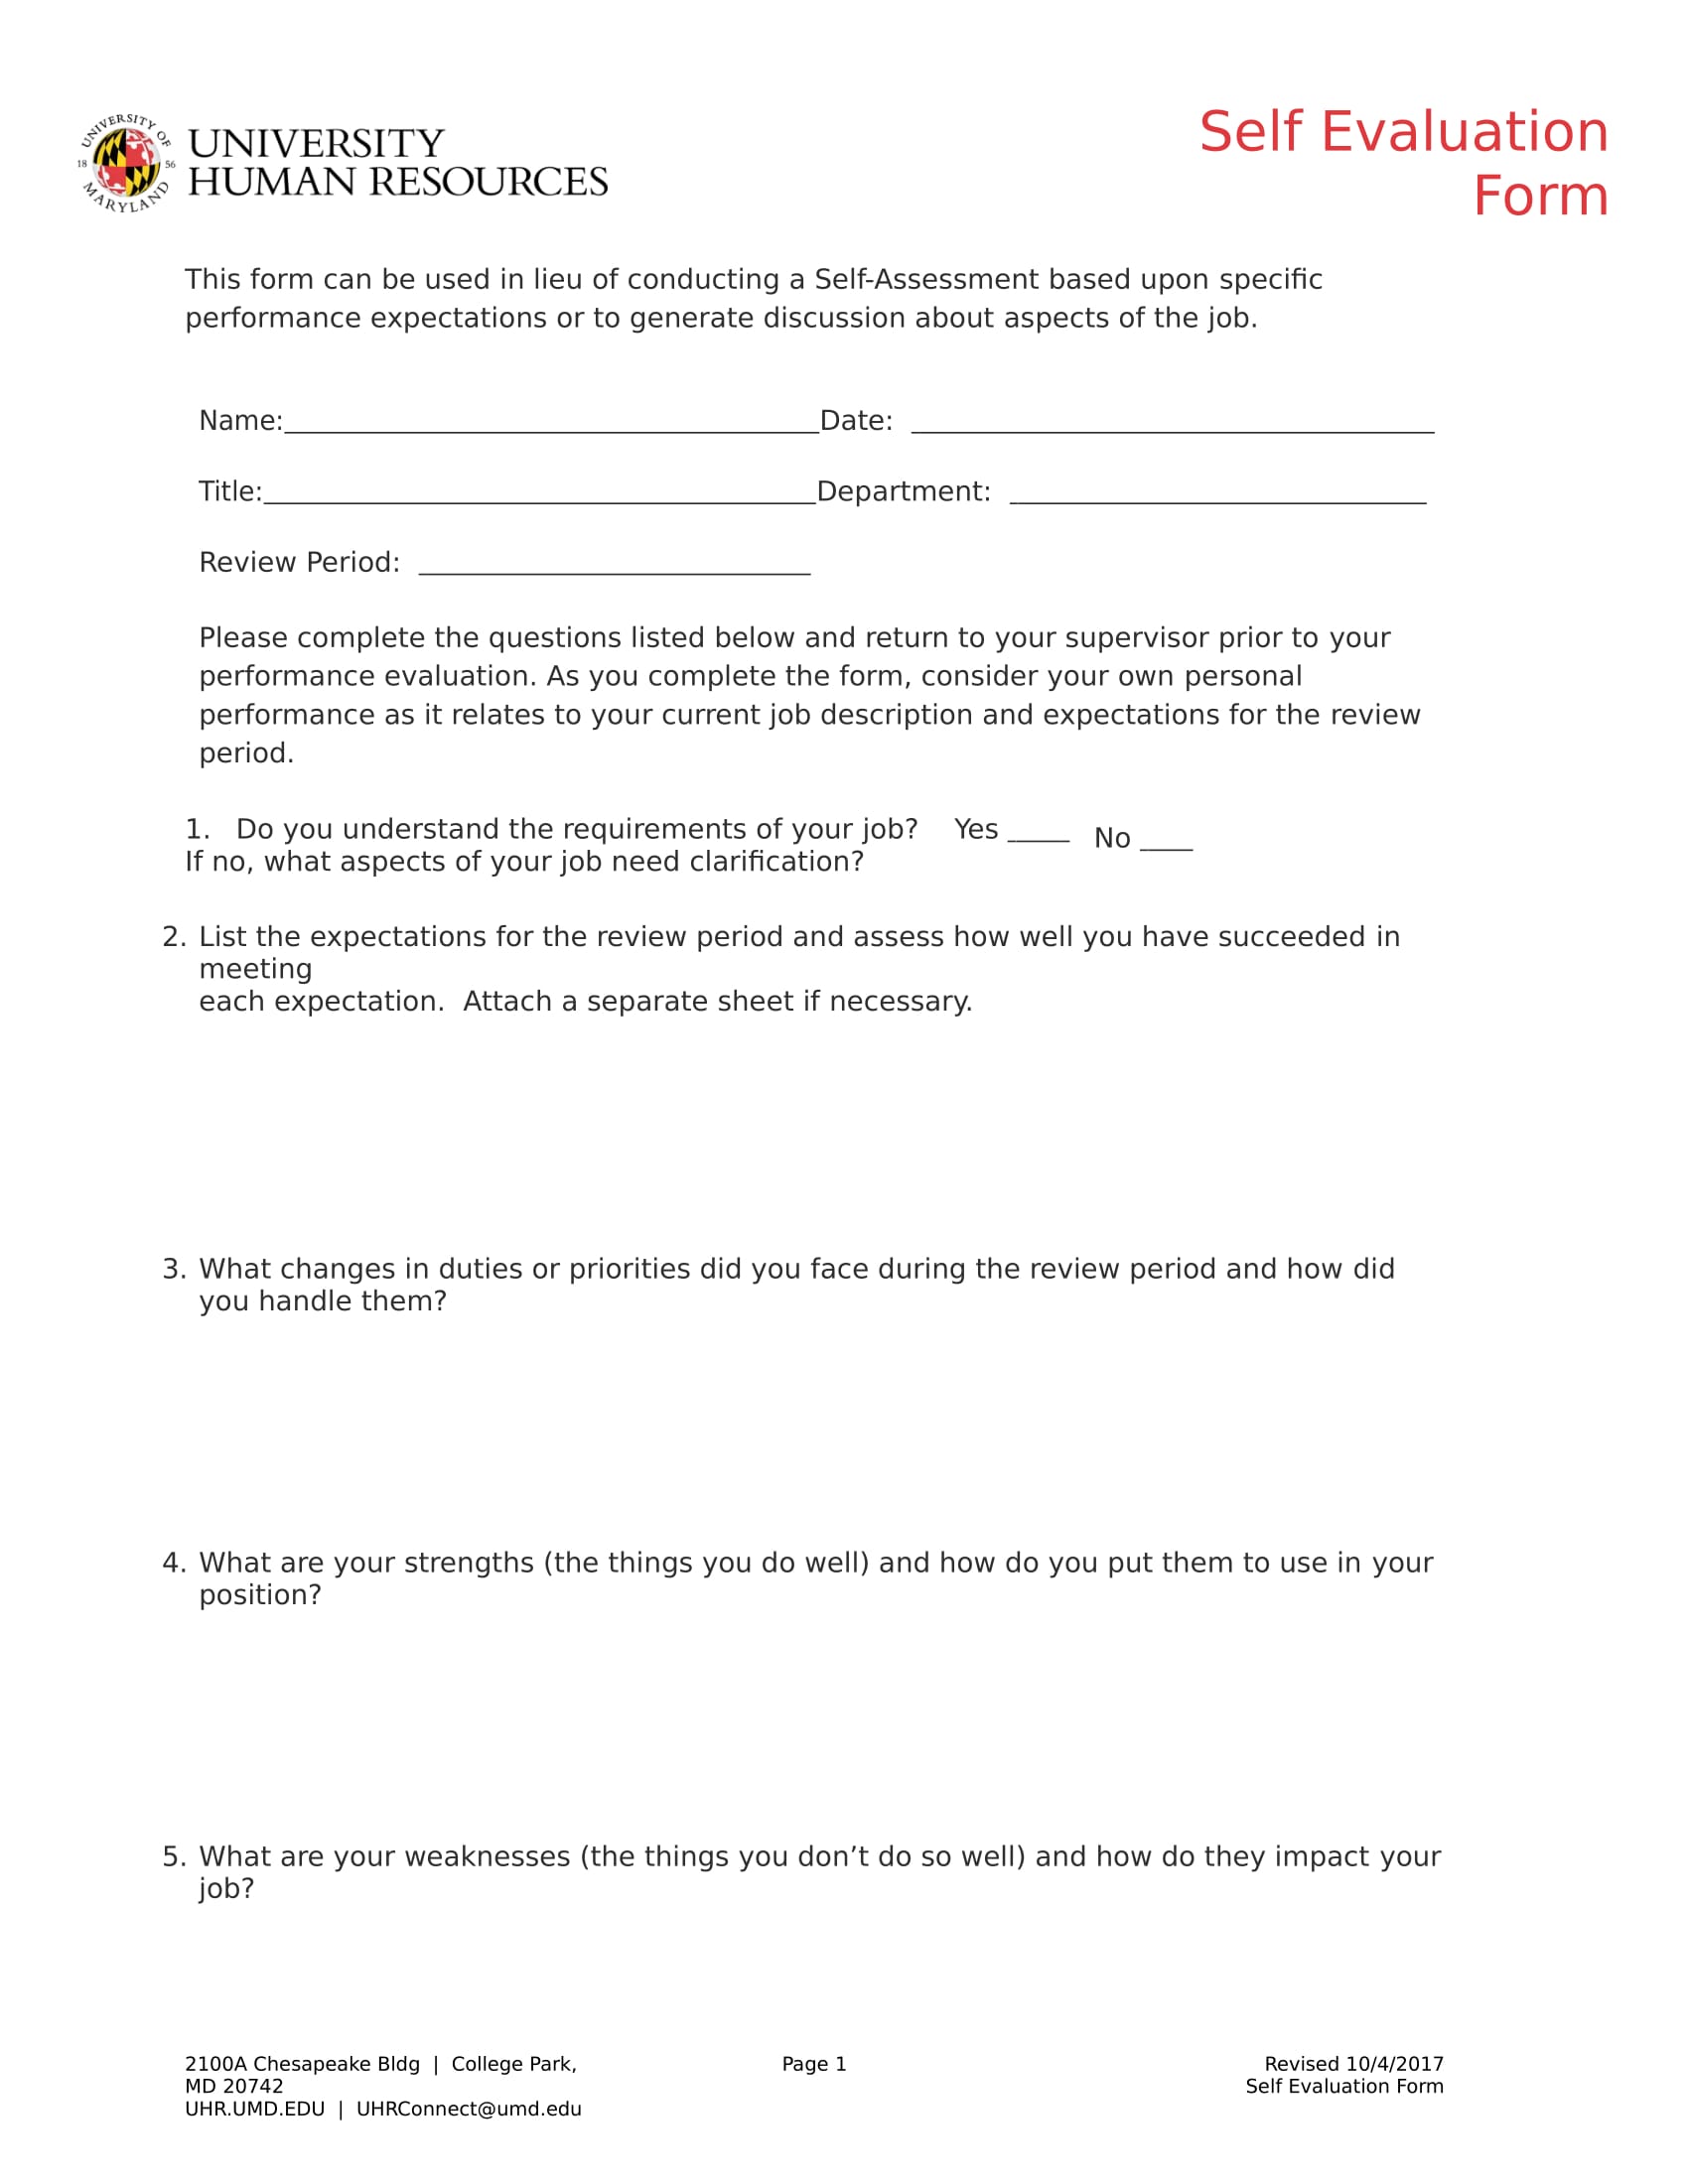 employee self evaluation form in doc 12